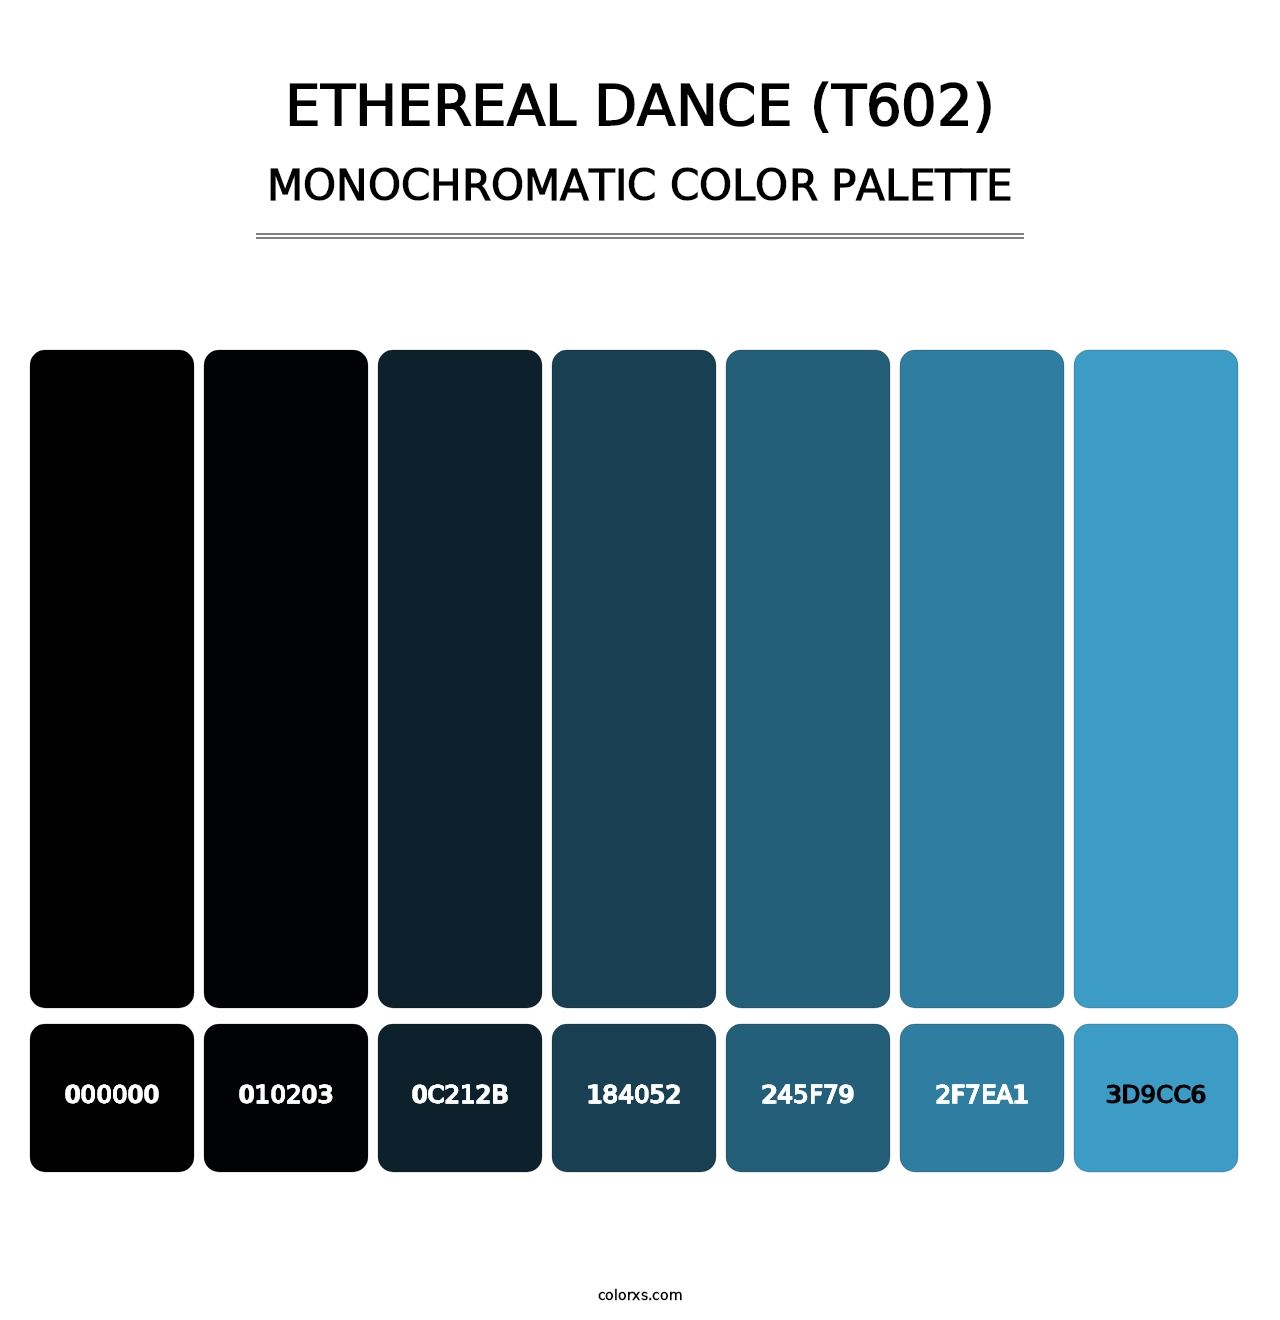 Ethereal Dance (T602) - Monochromatic Color Palette